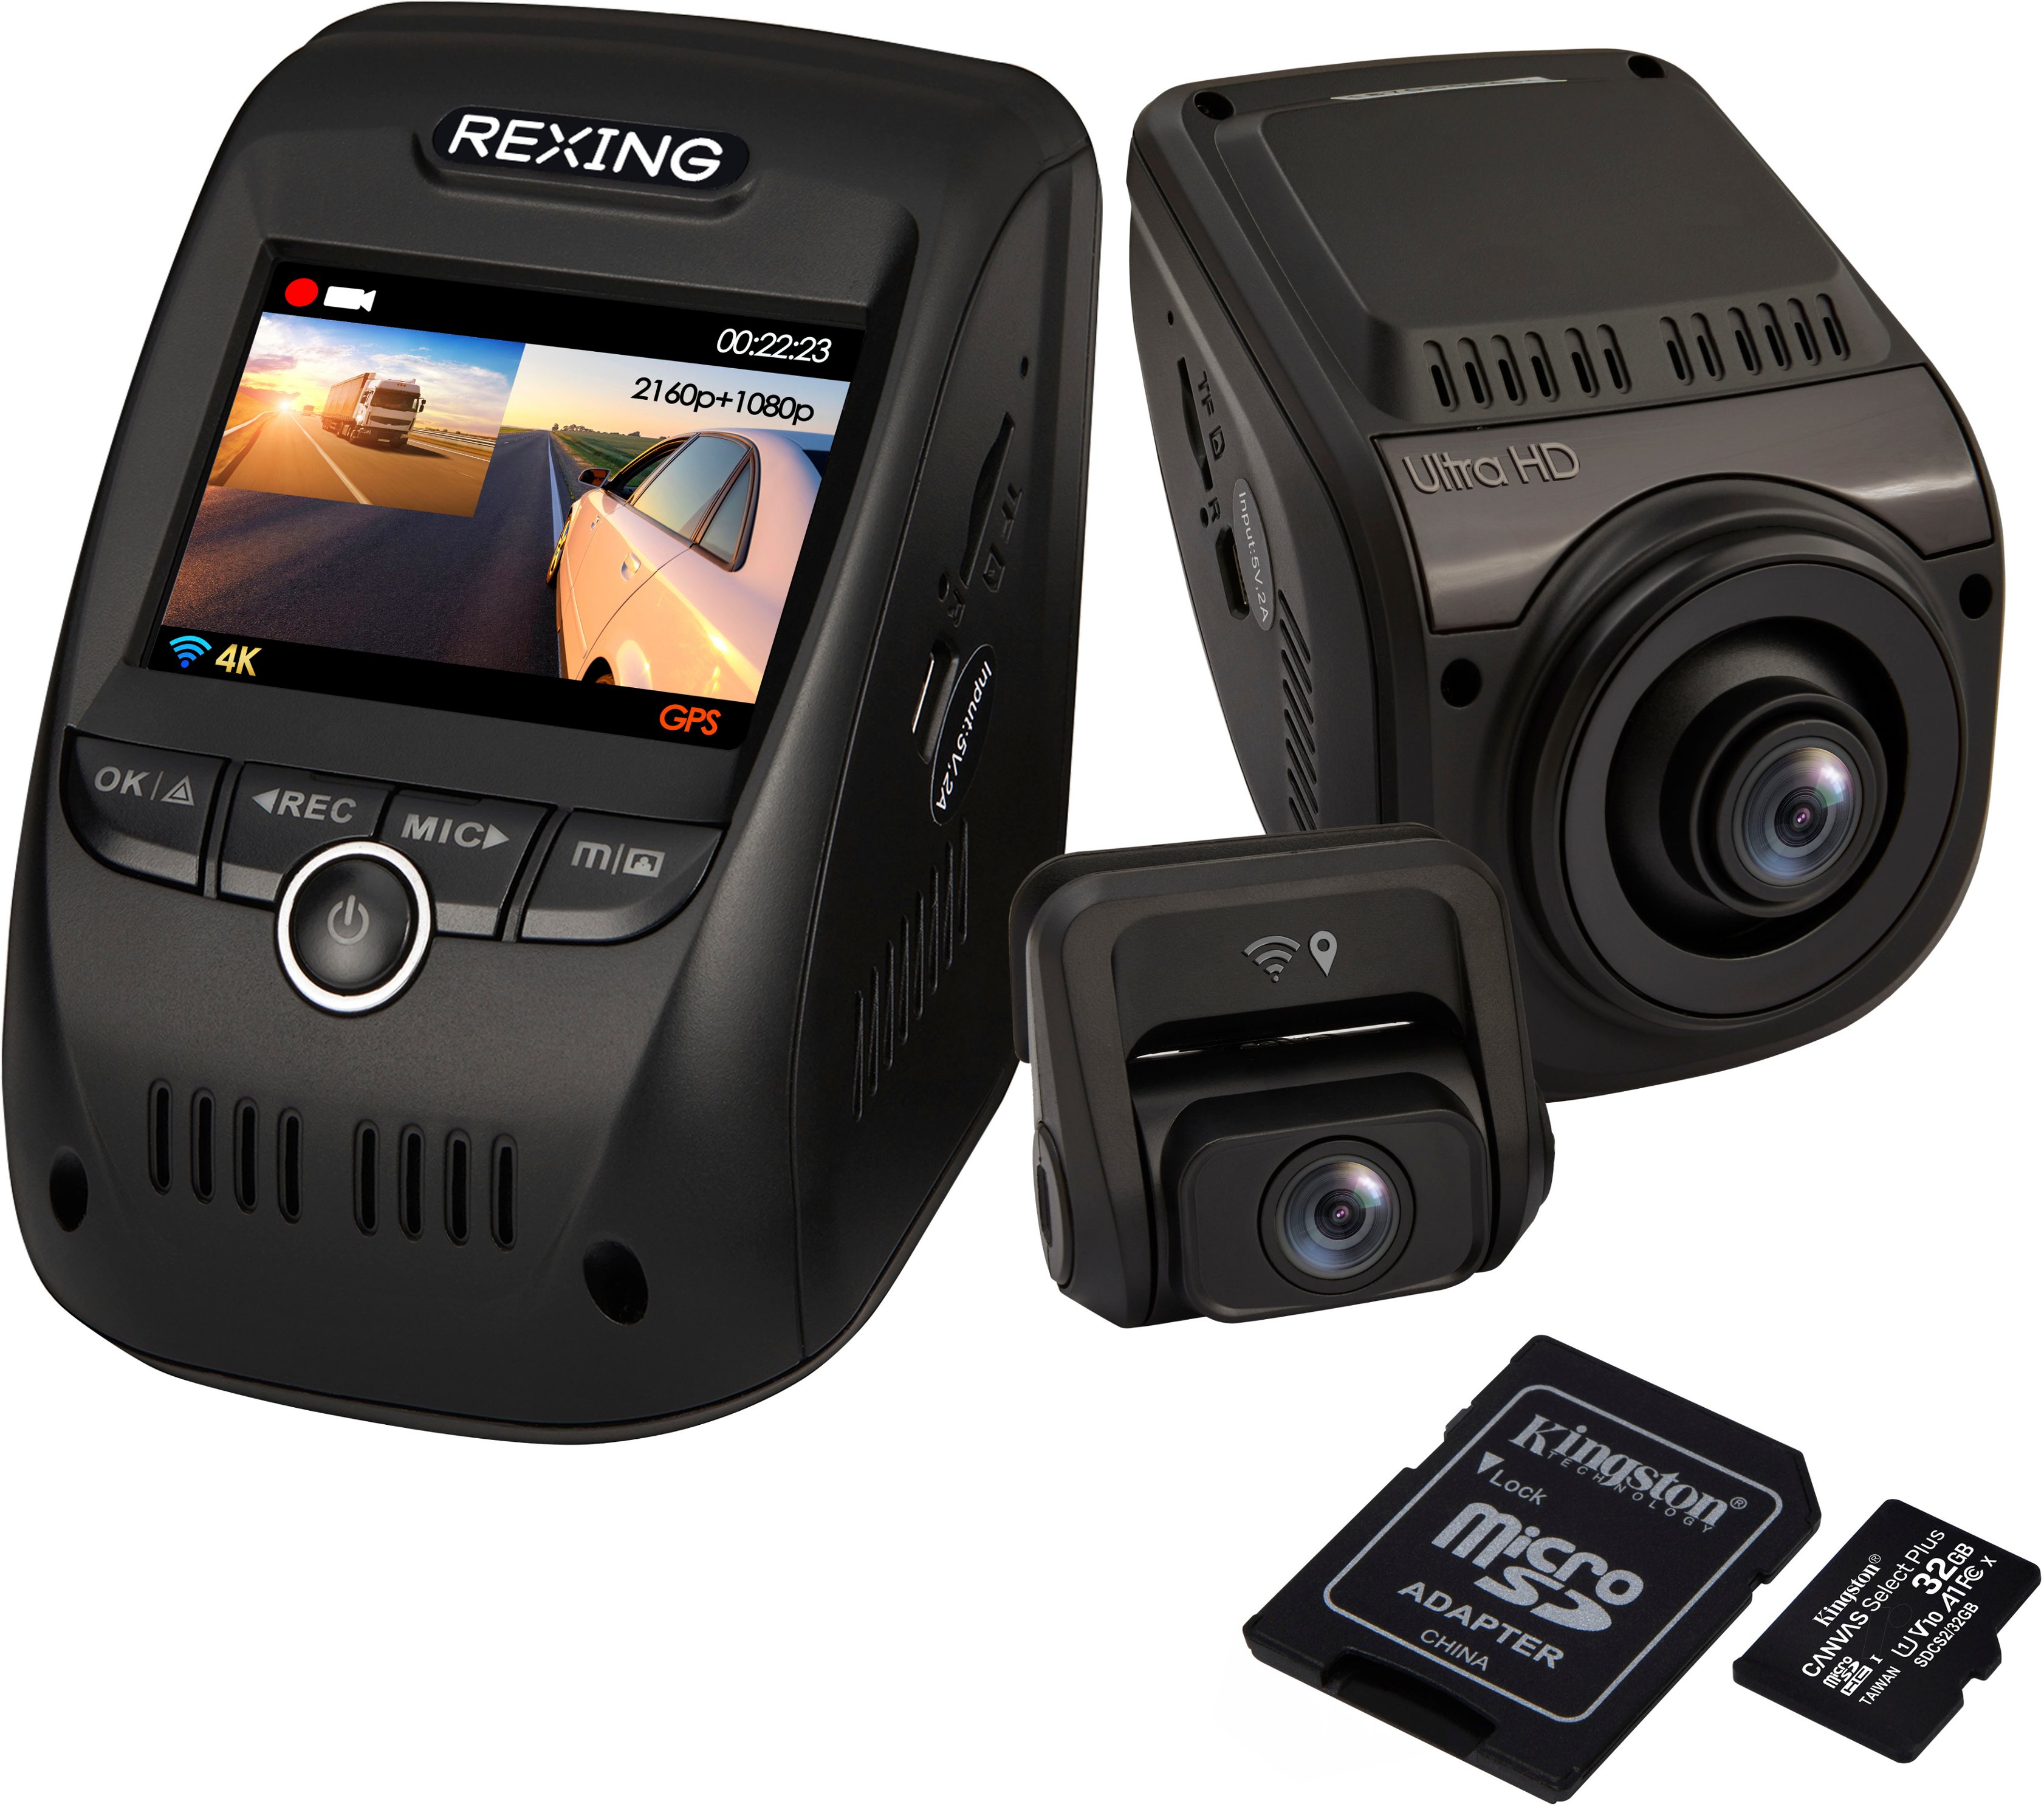 Hd Dashcam Wireless WiFi Connection Front and Rear Dual Lens with